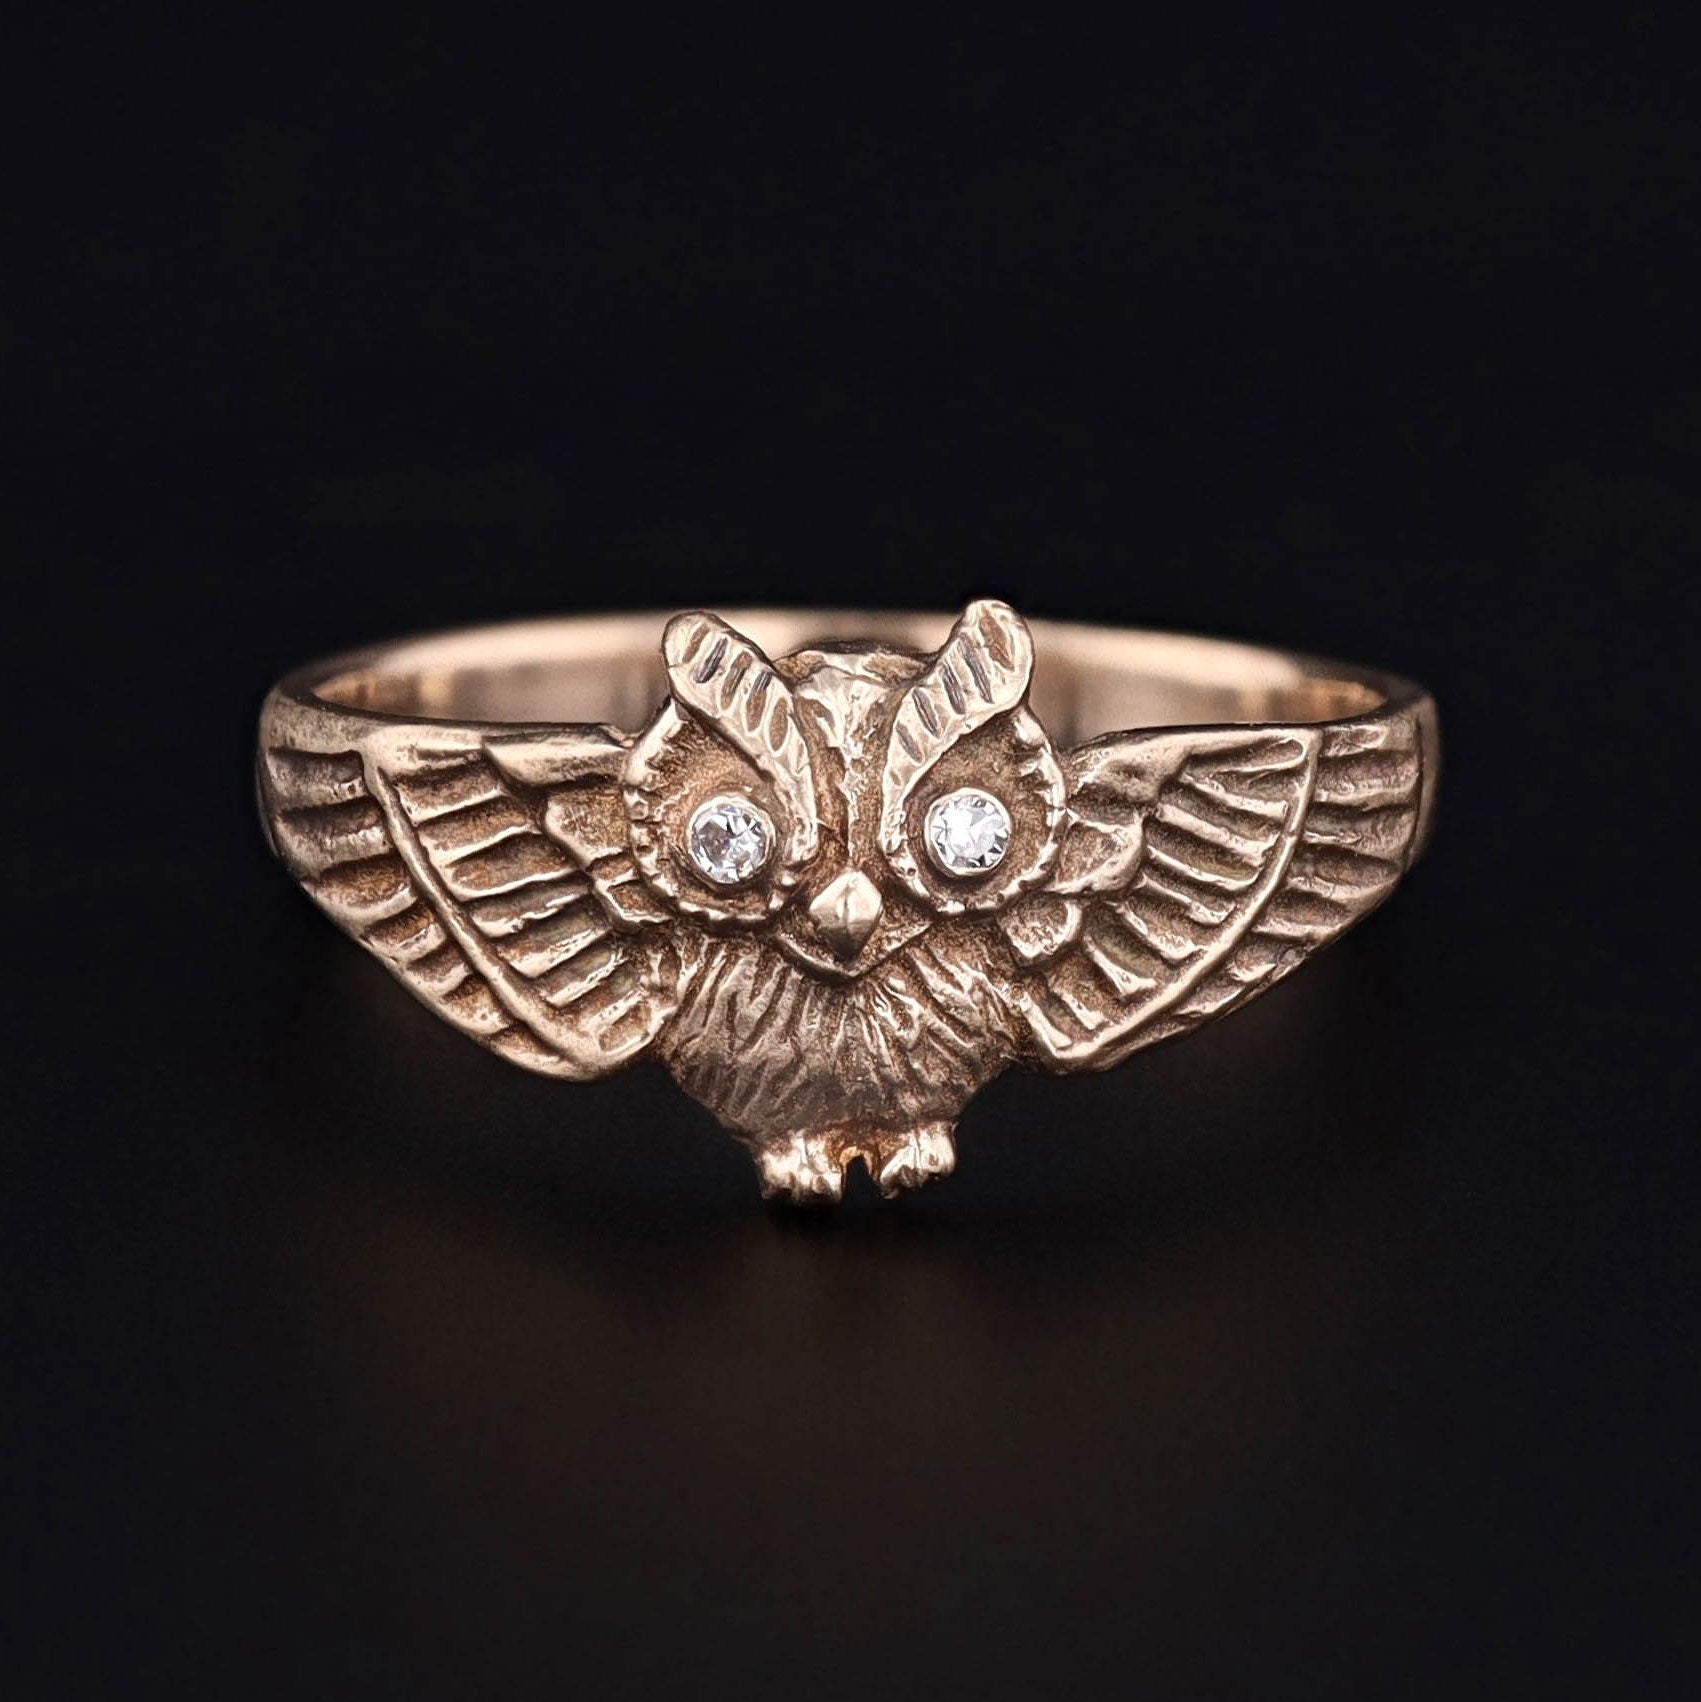 Owl Ring 14k Gold with Diamond Eyes Recast from an Antique Ring